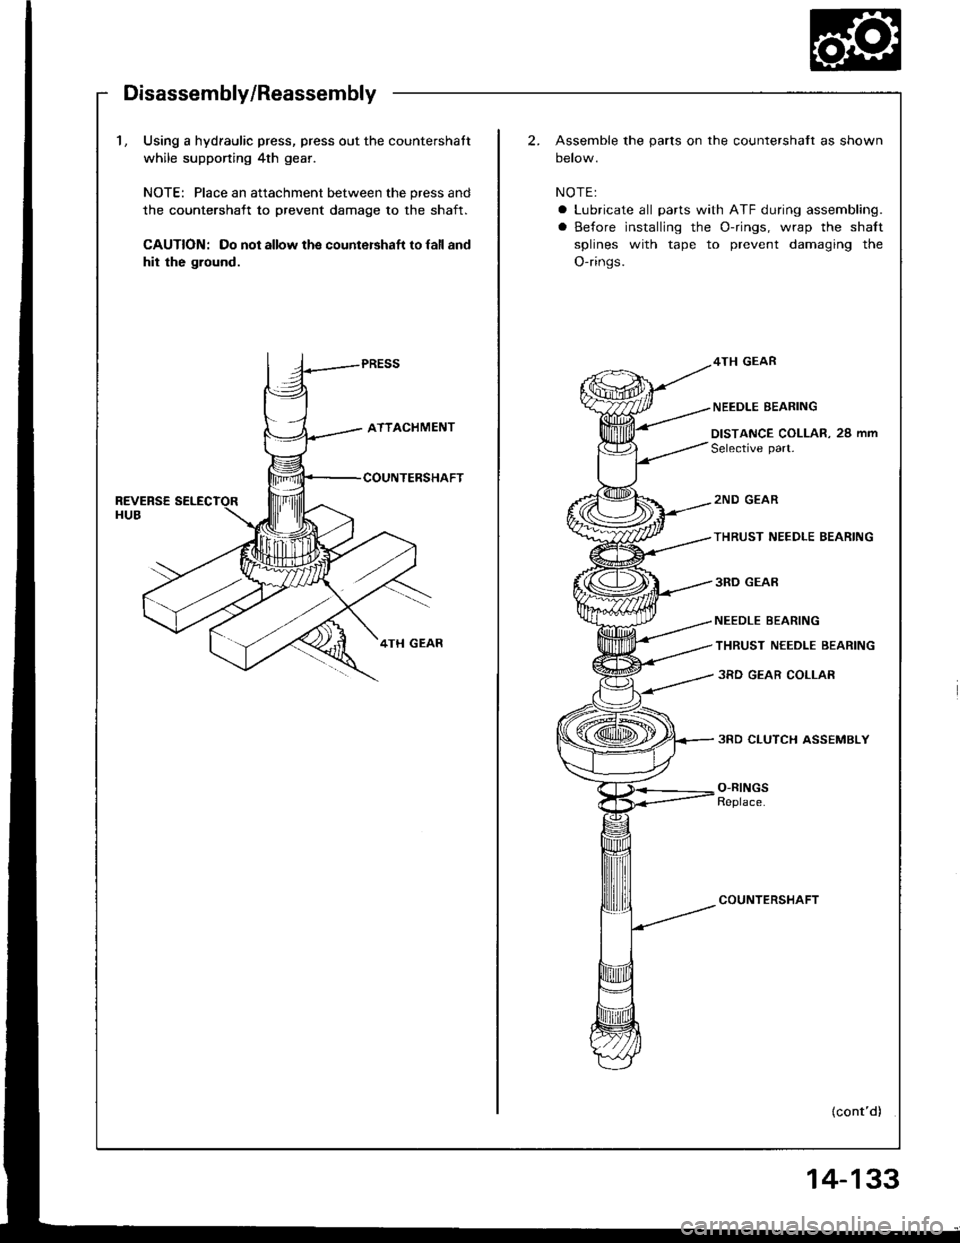 ACURA INTEGRA 1994  Service Owners Manual Disassembly/Reassembly
1, Using a hydraulic press, press out the countershatt
while supponing 4th gear.
NOTE: Place an attachment between the press and
the countershatt to prevent damage to the shaft.